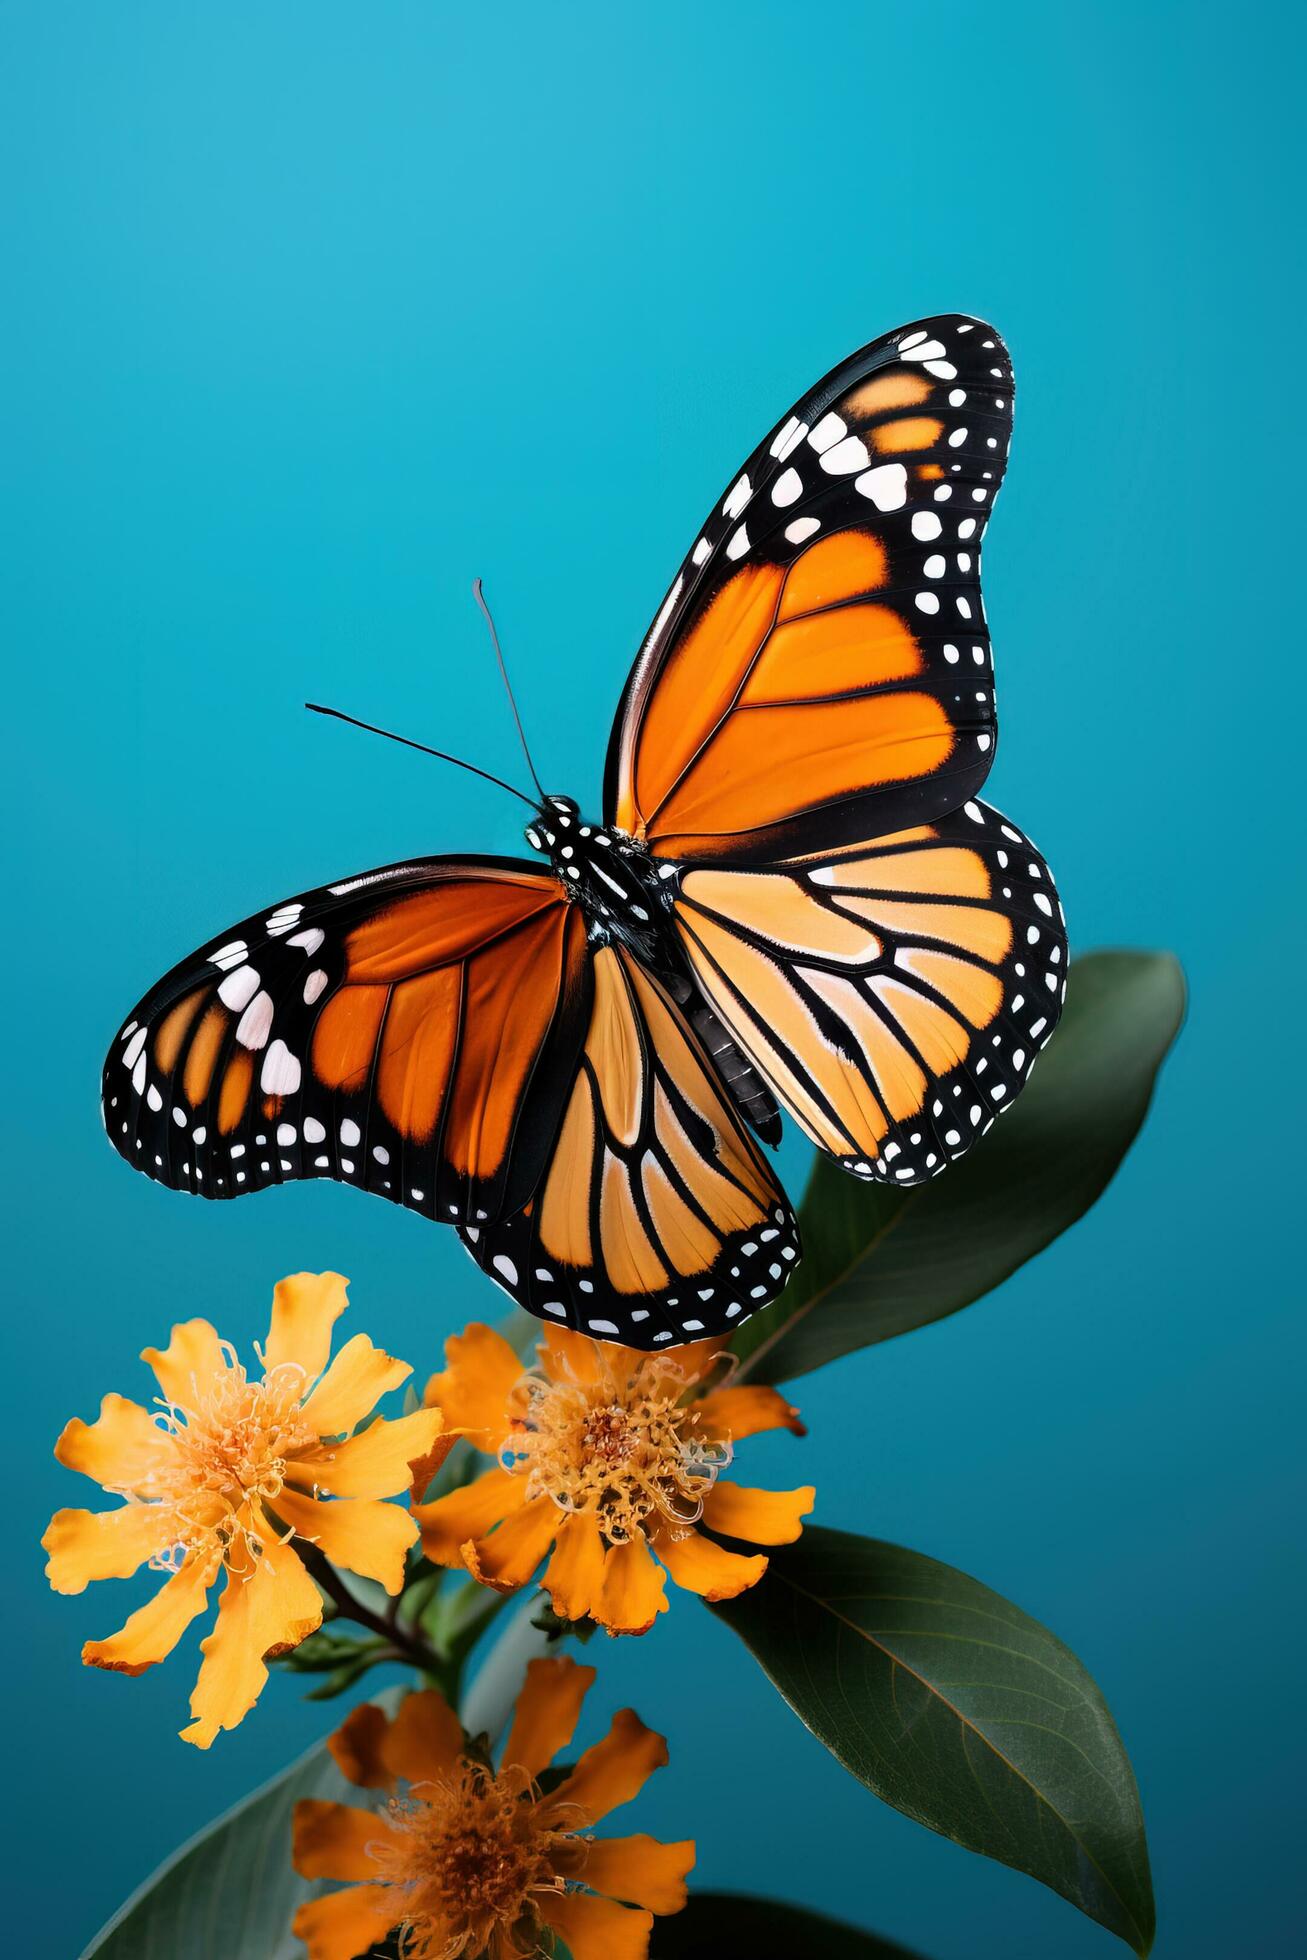 A close-up shot of a single Monarch butterfly perched on a